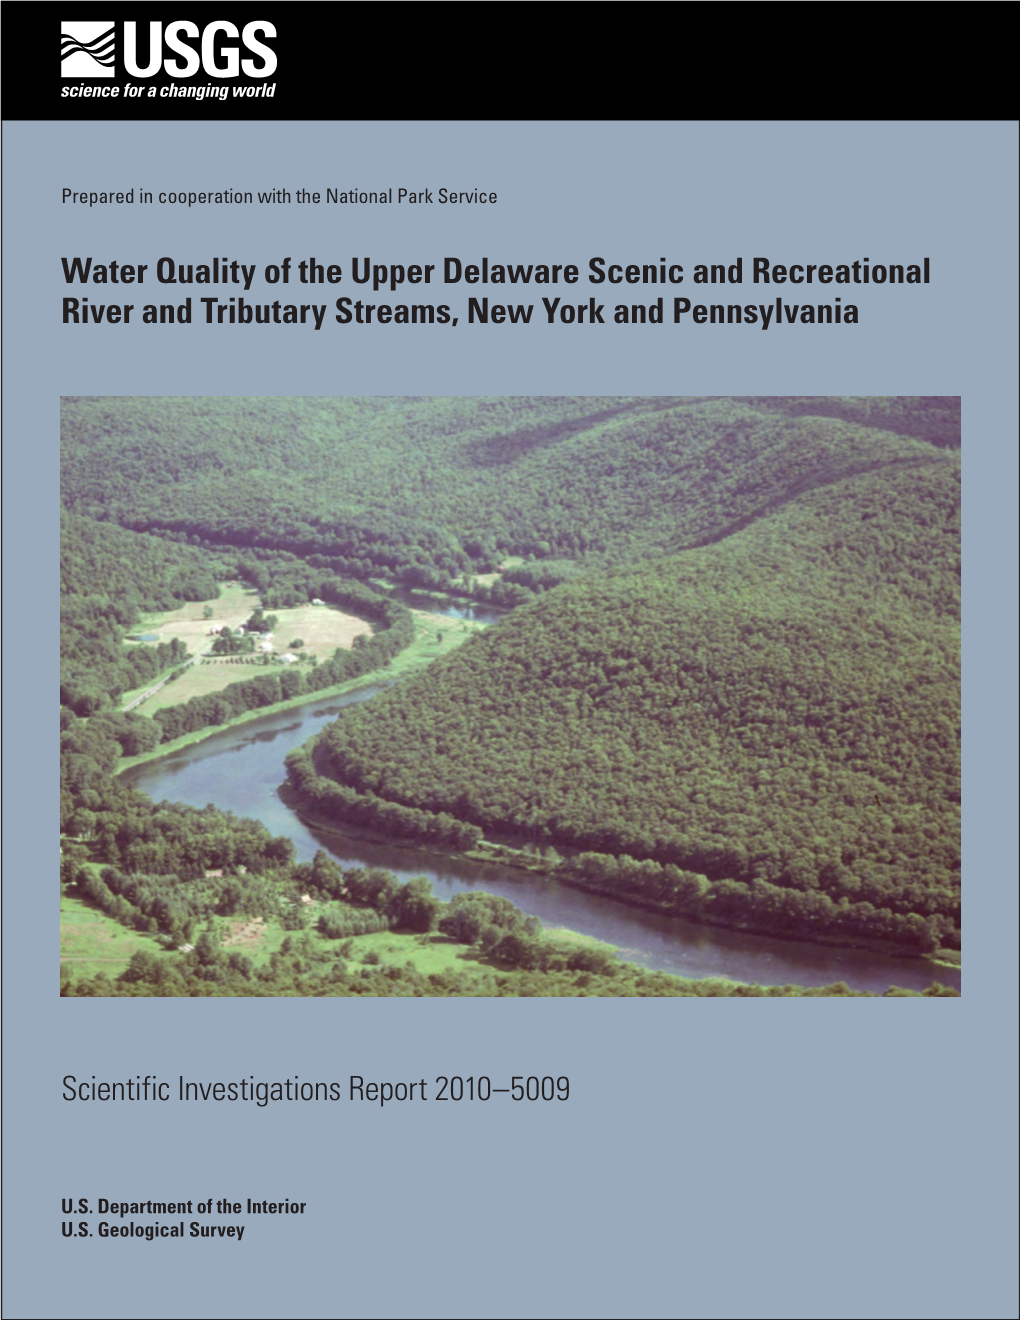 Water Quality of the Upper Delaware Scenic and Recreational River and Tributary Streams, New York and Pennsylvania